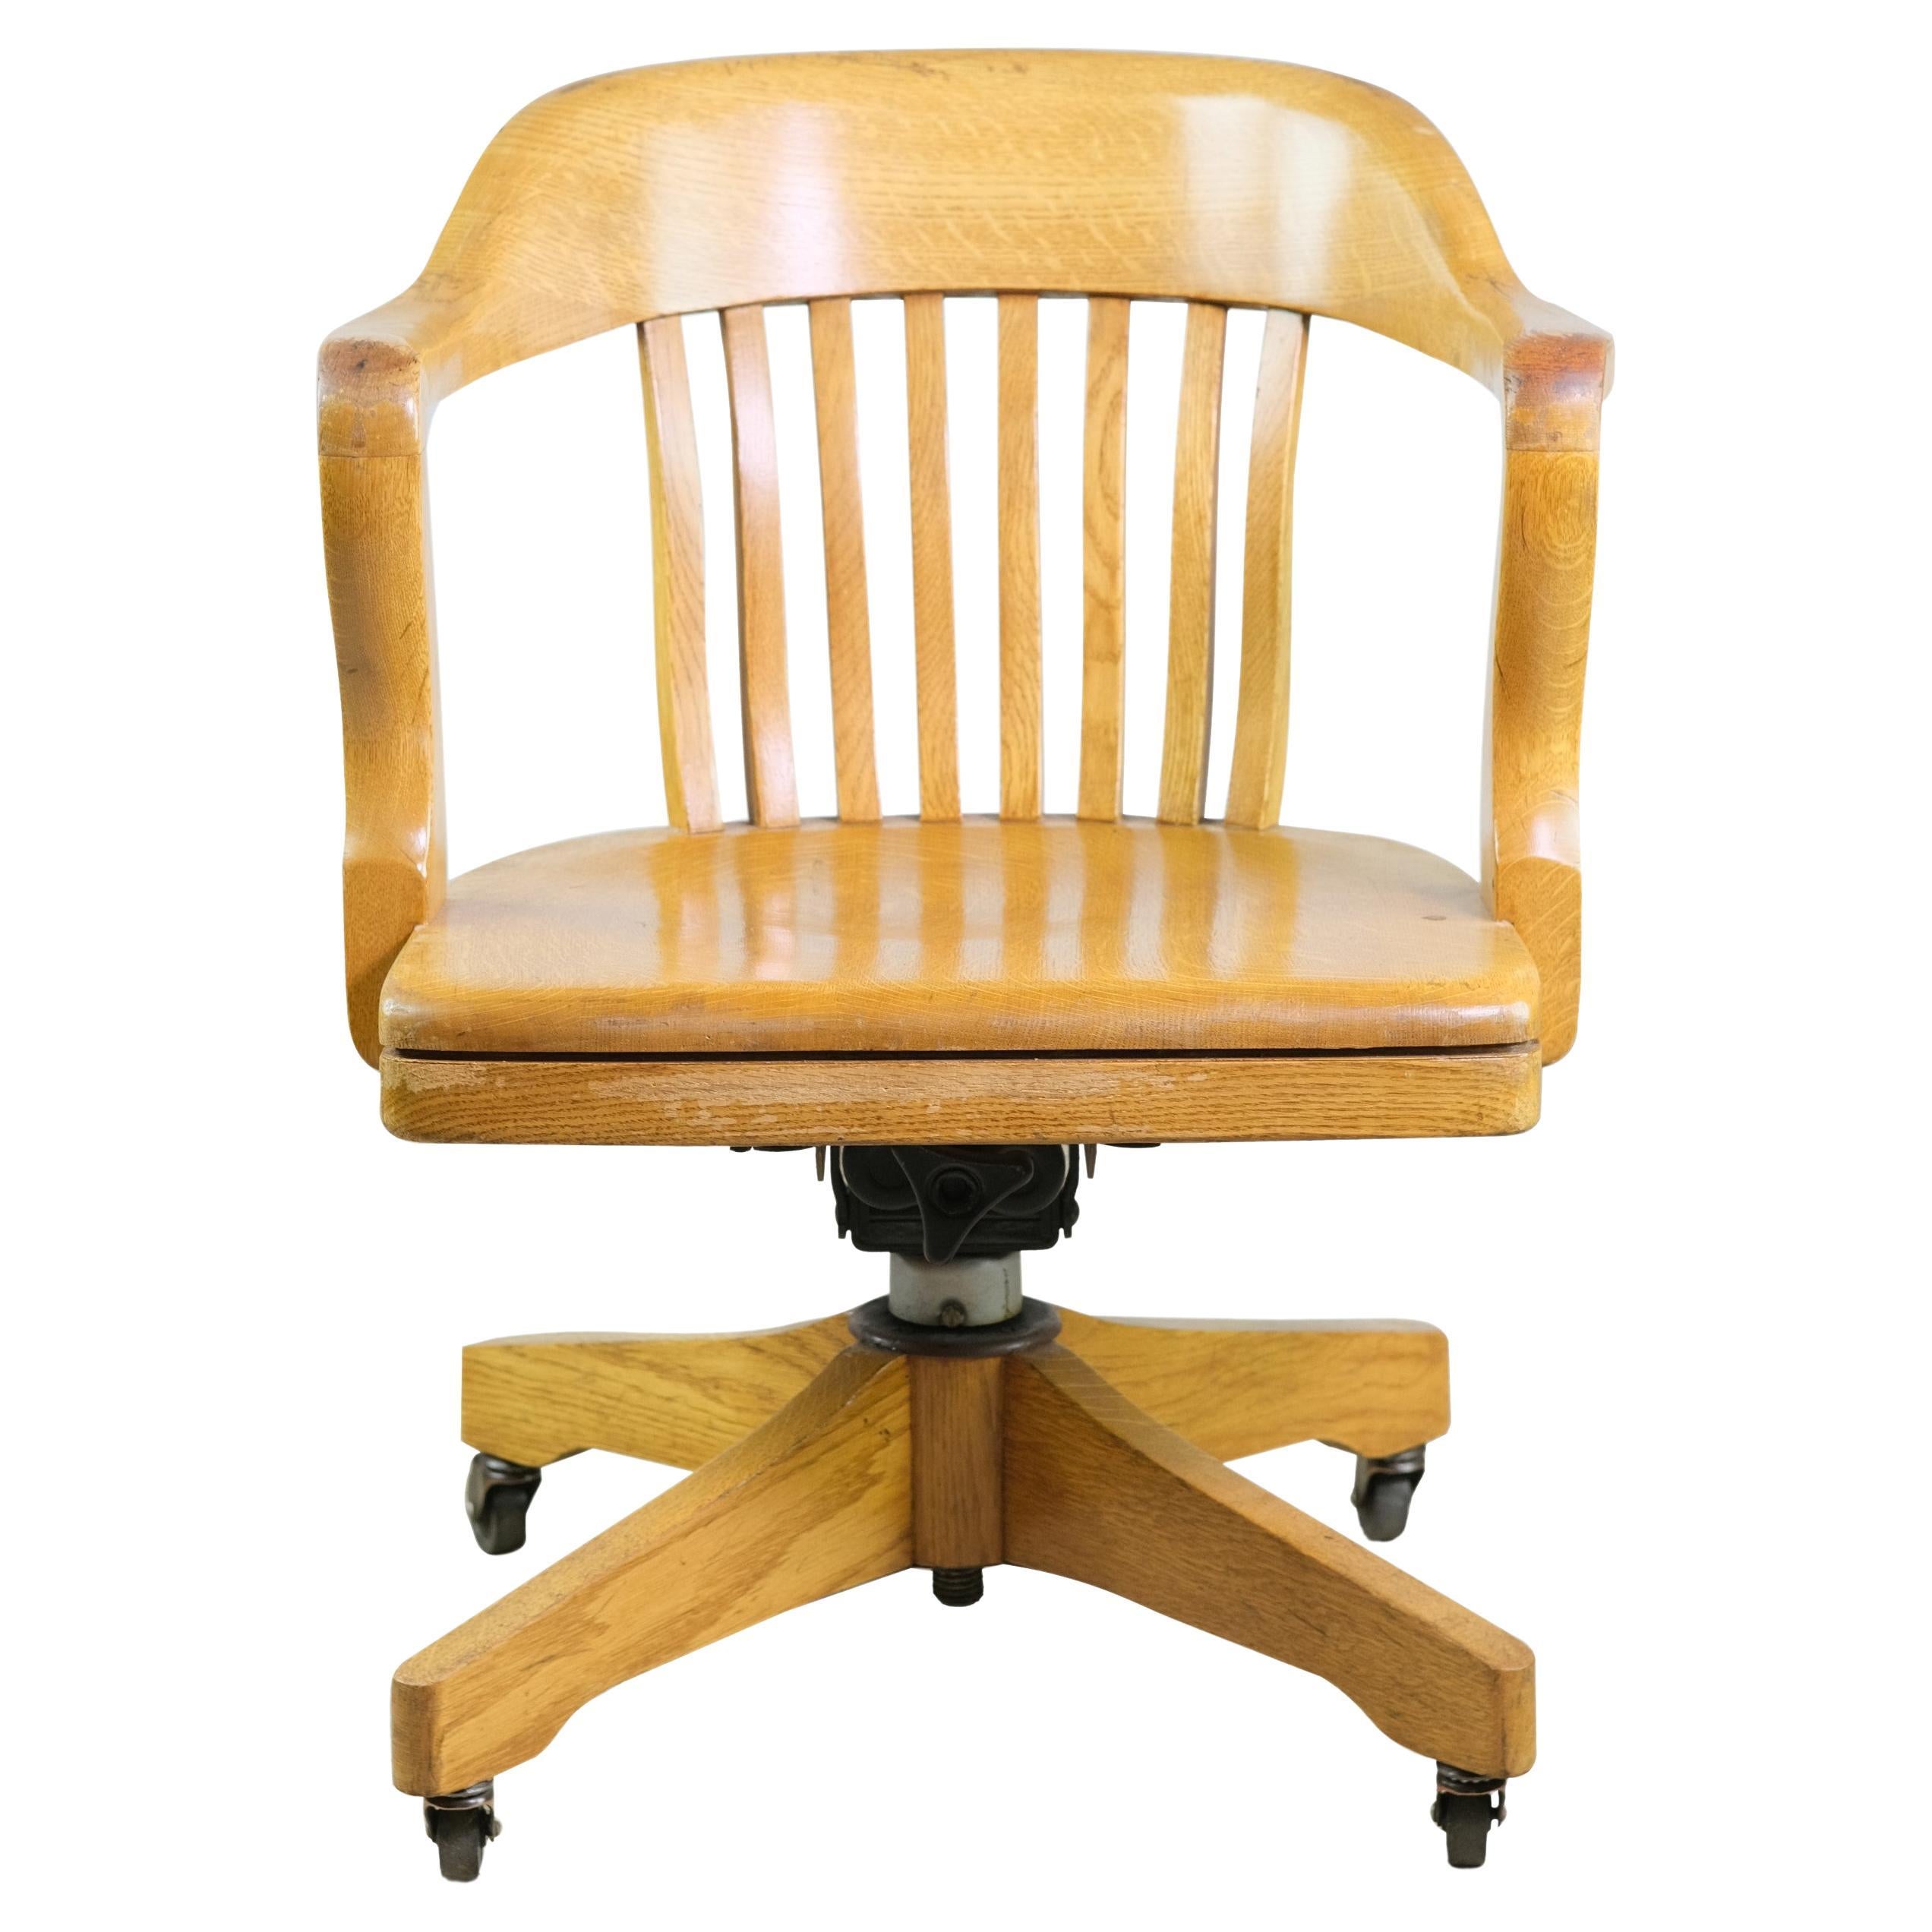 Solid Oak Rolling Bankers Chair Adjustable Seat Light Stain